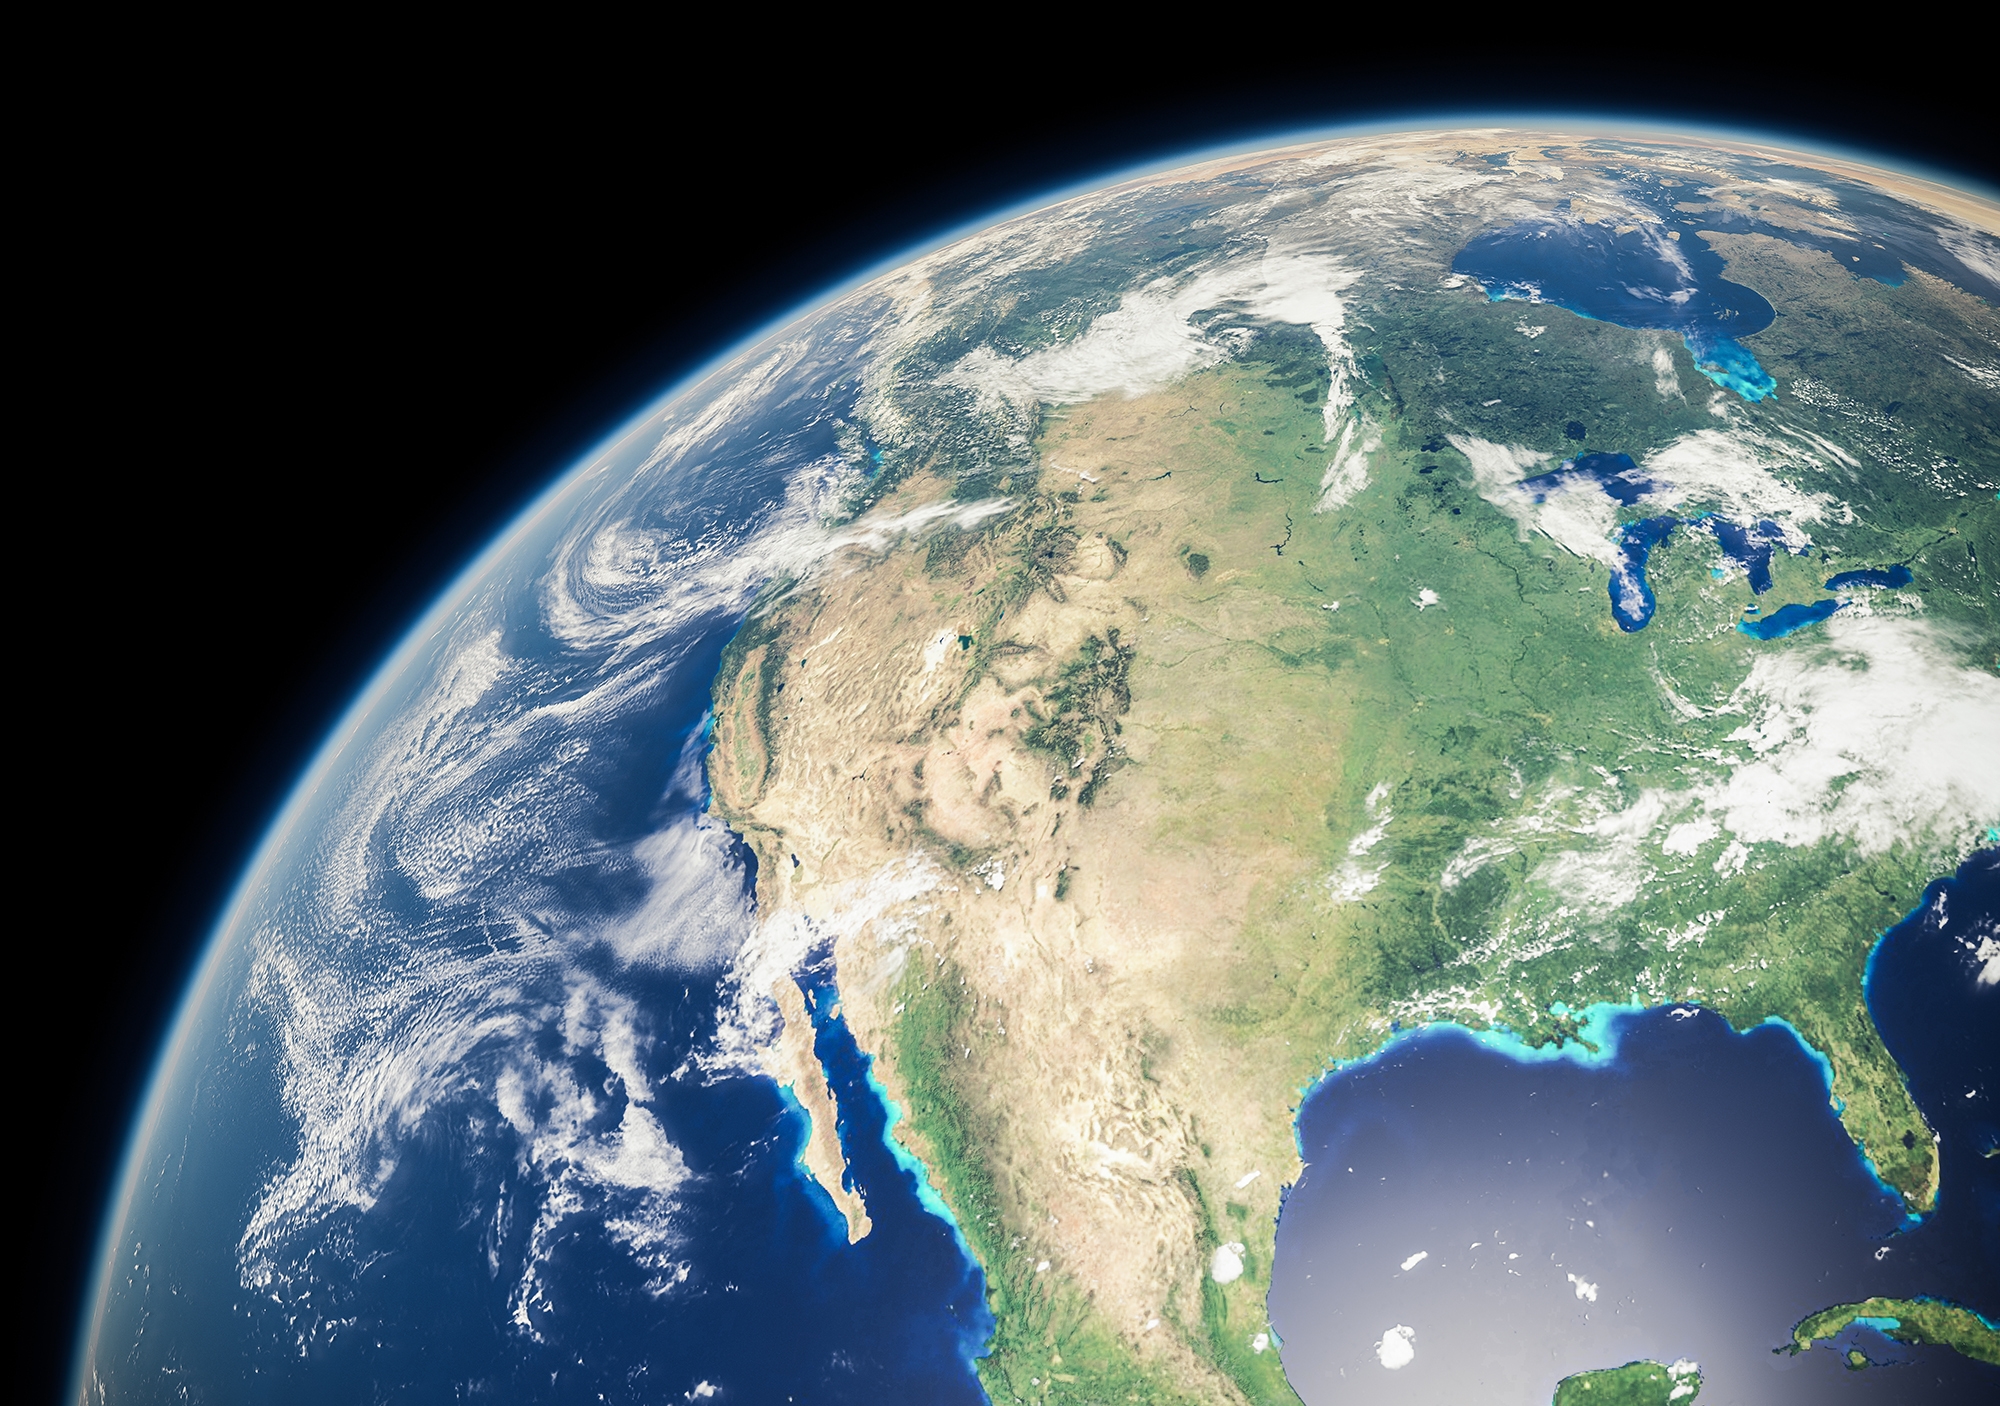 An image of North America from outside the atmosphere.